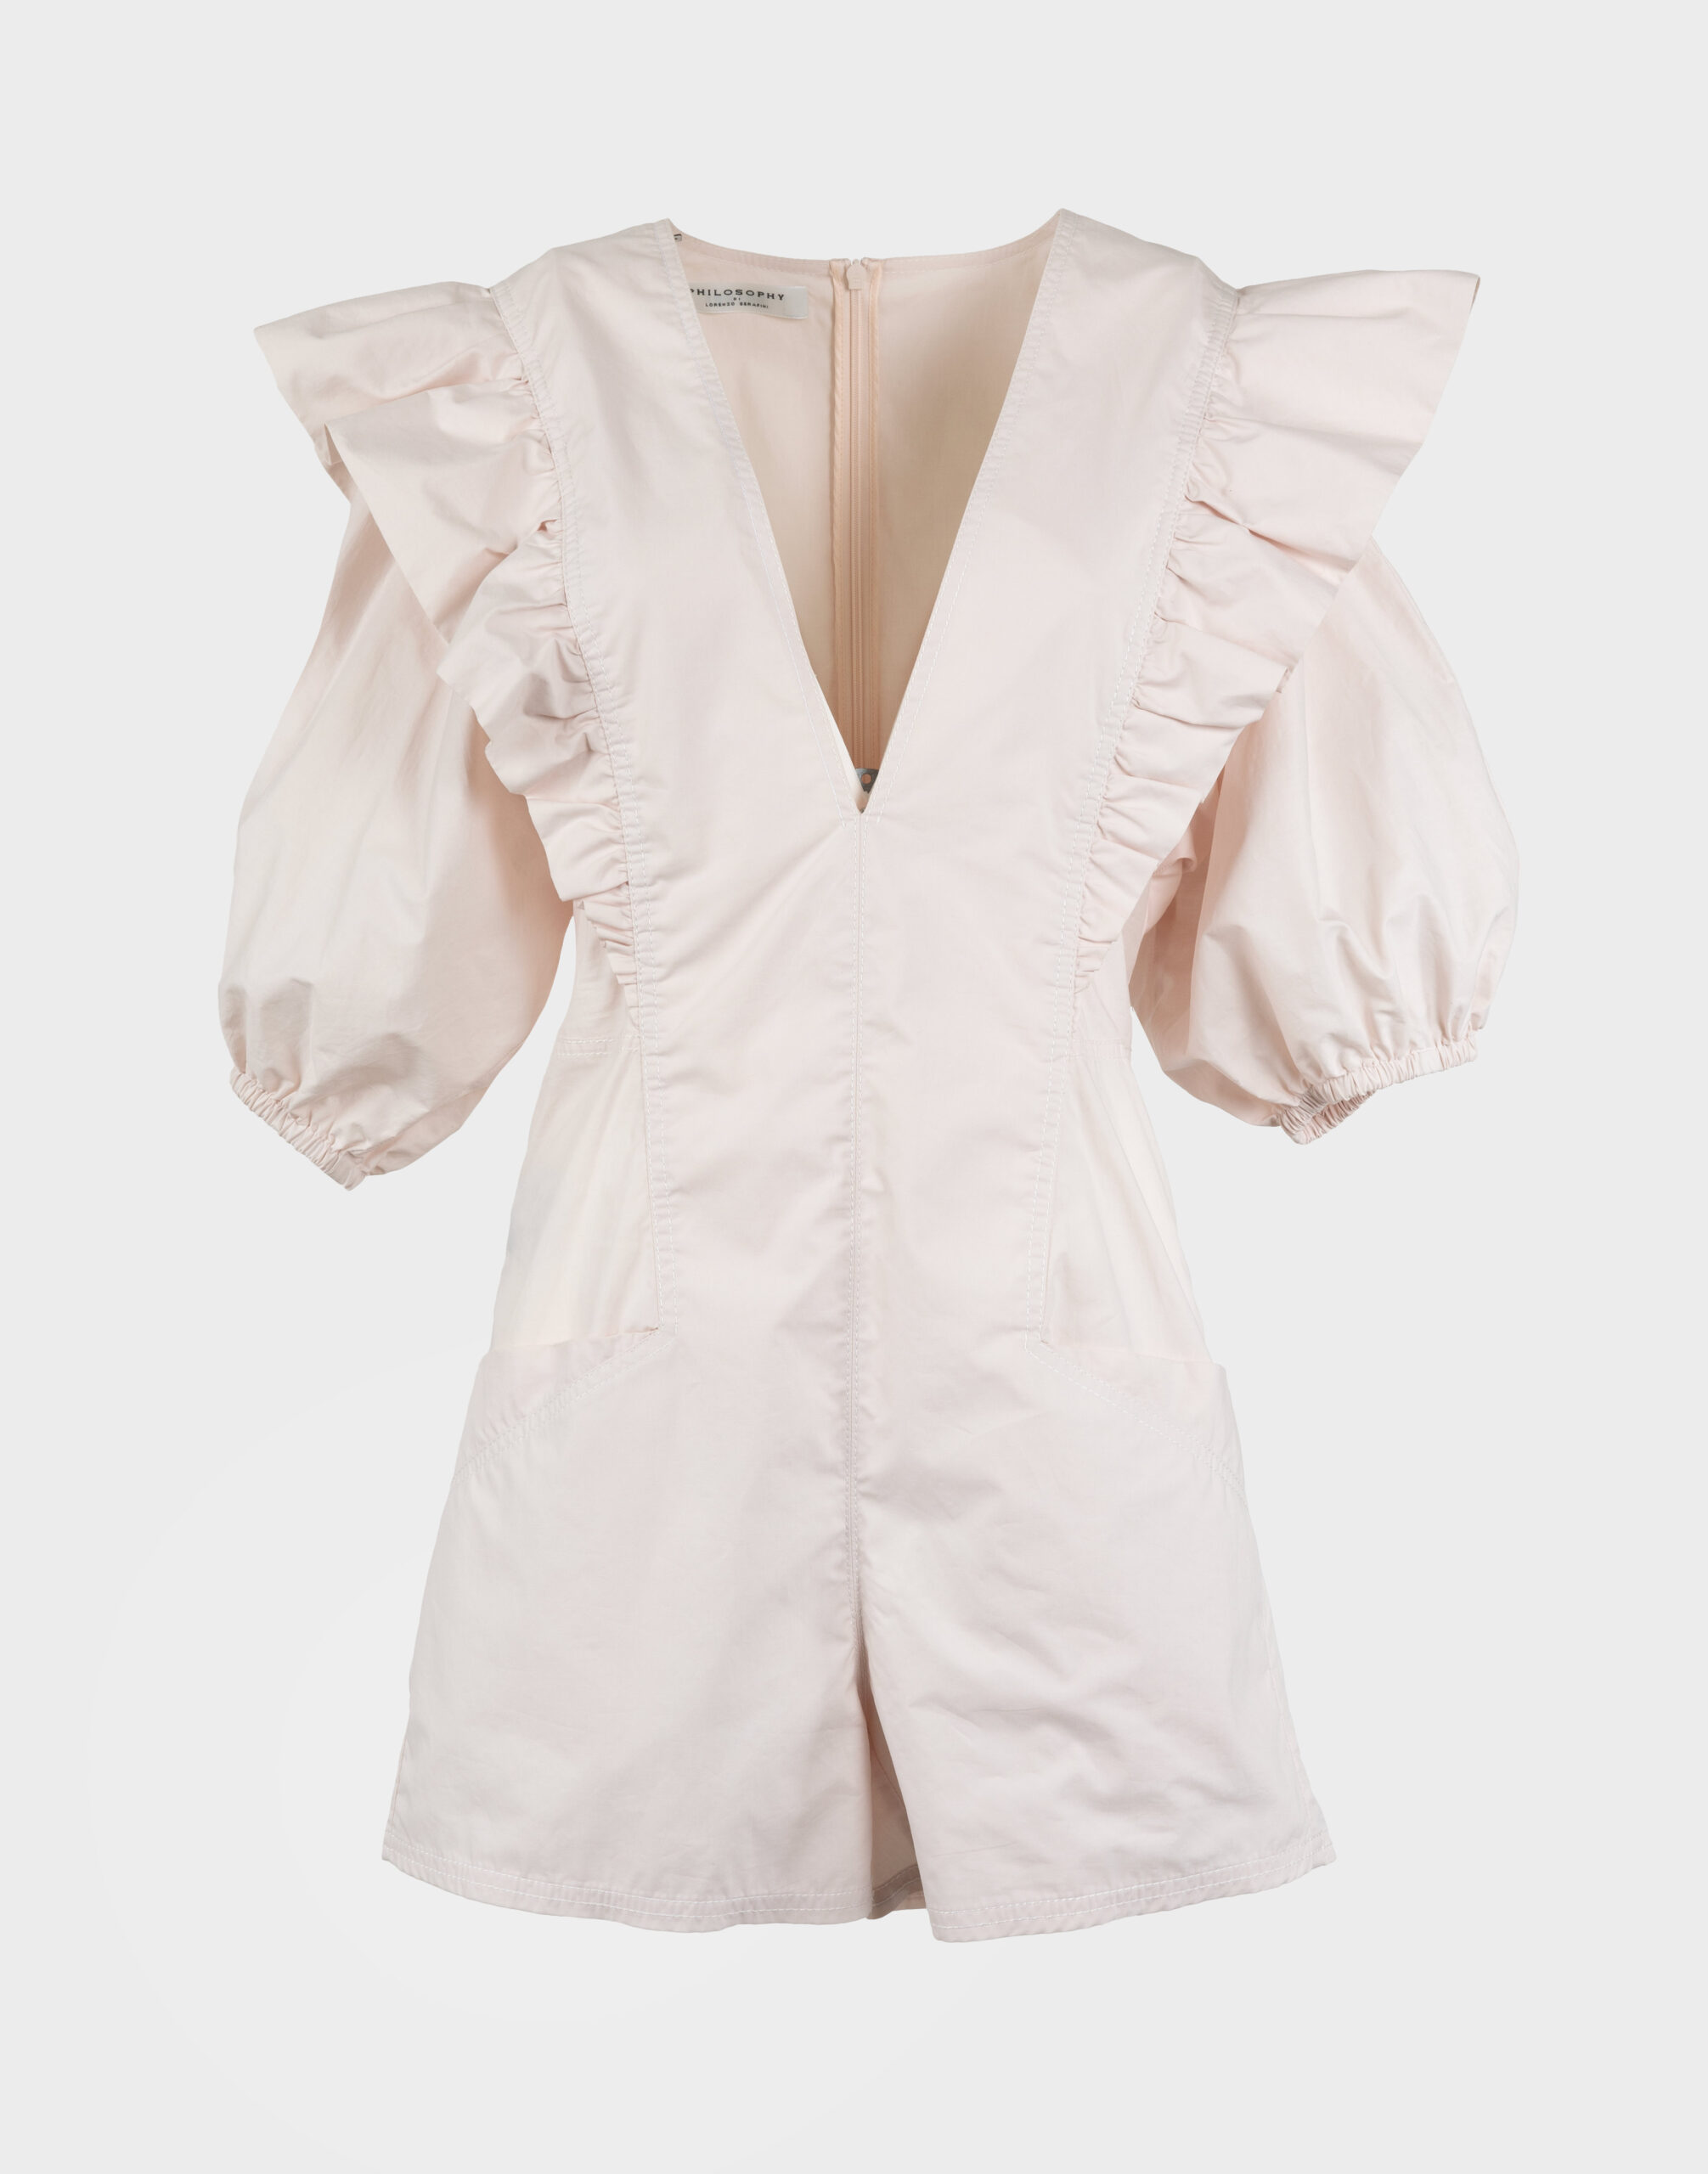 Women's pink playsuit with a V-neckline, puff sleeves, and ruffles on the neckline.